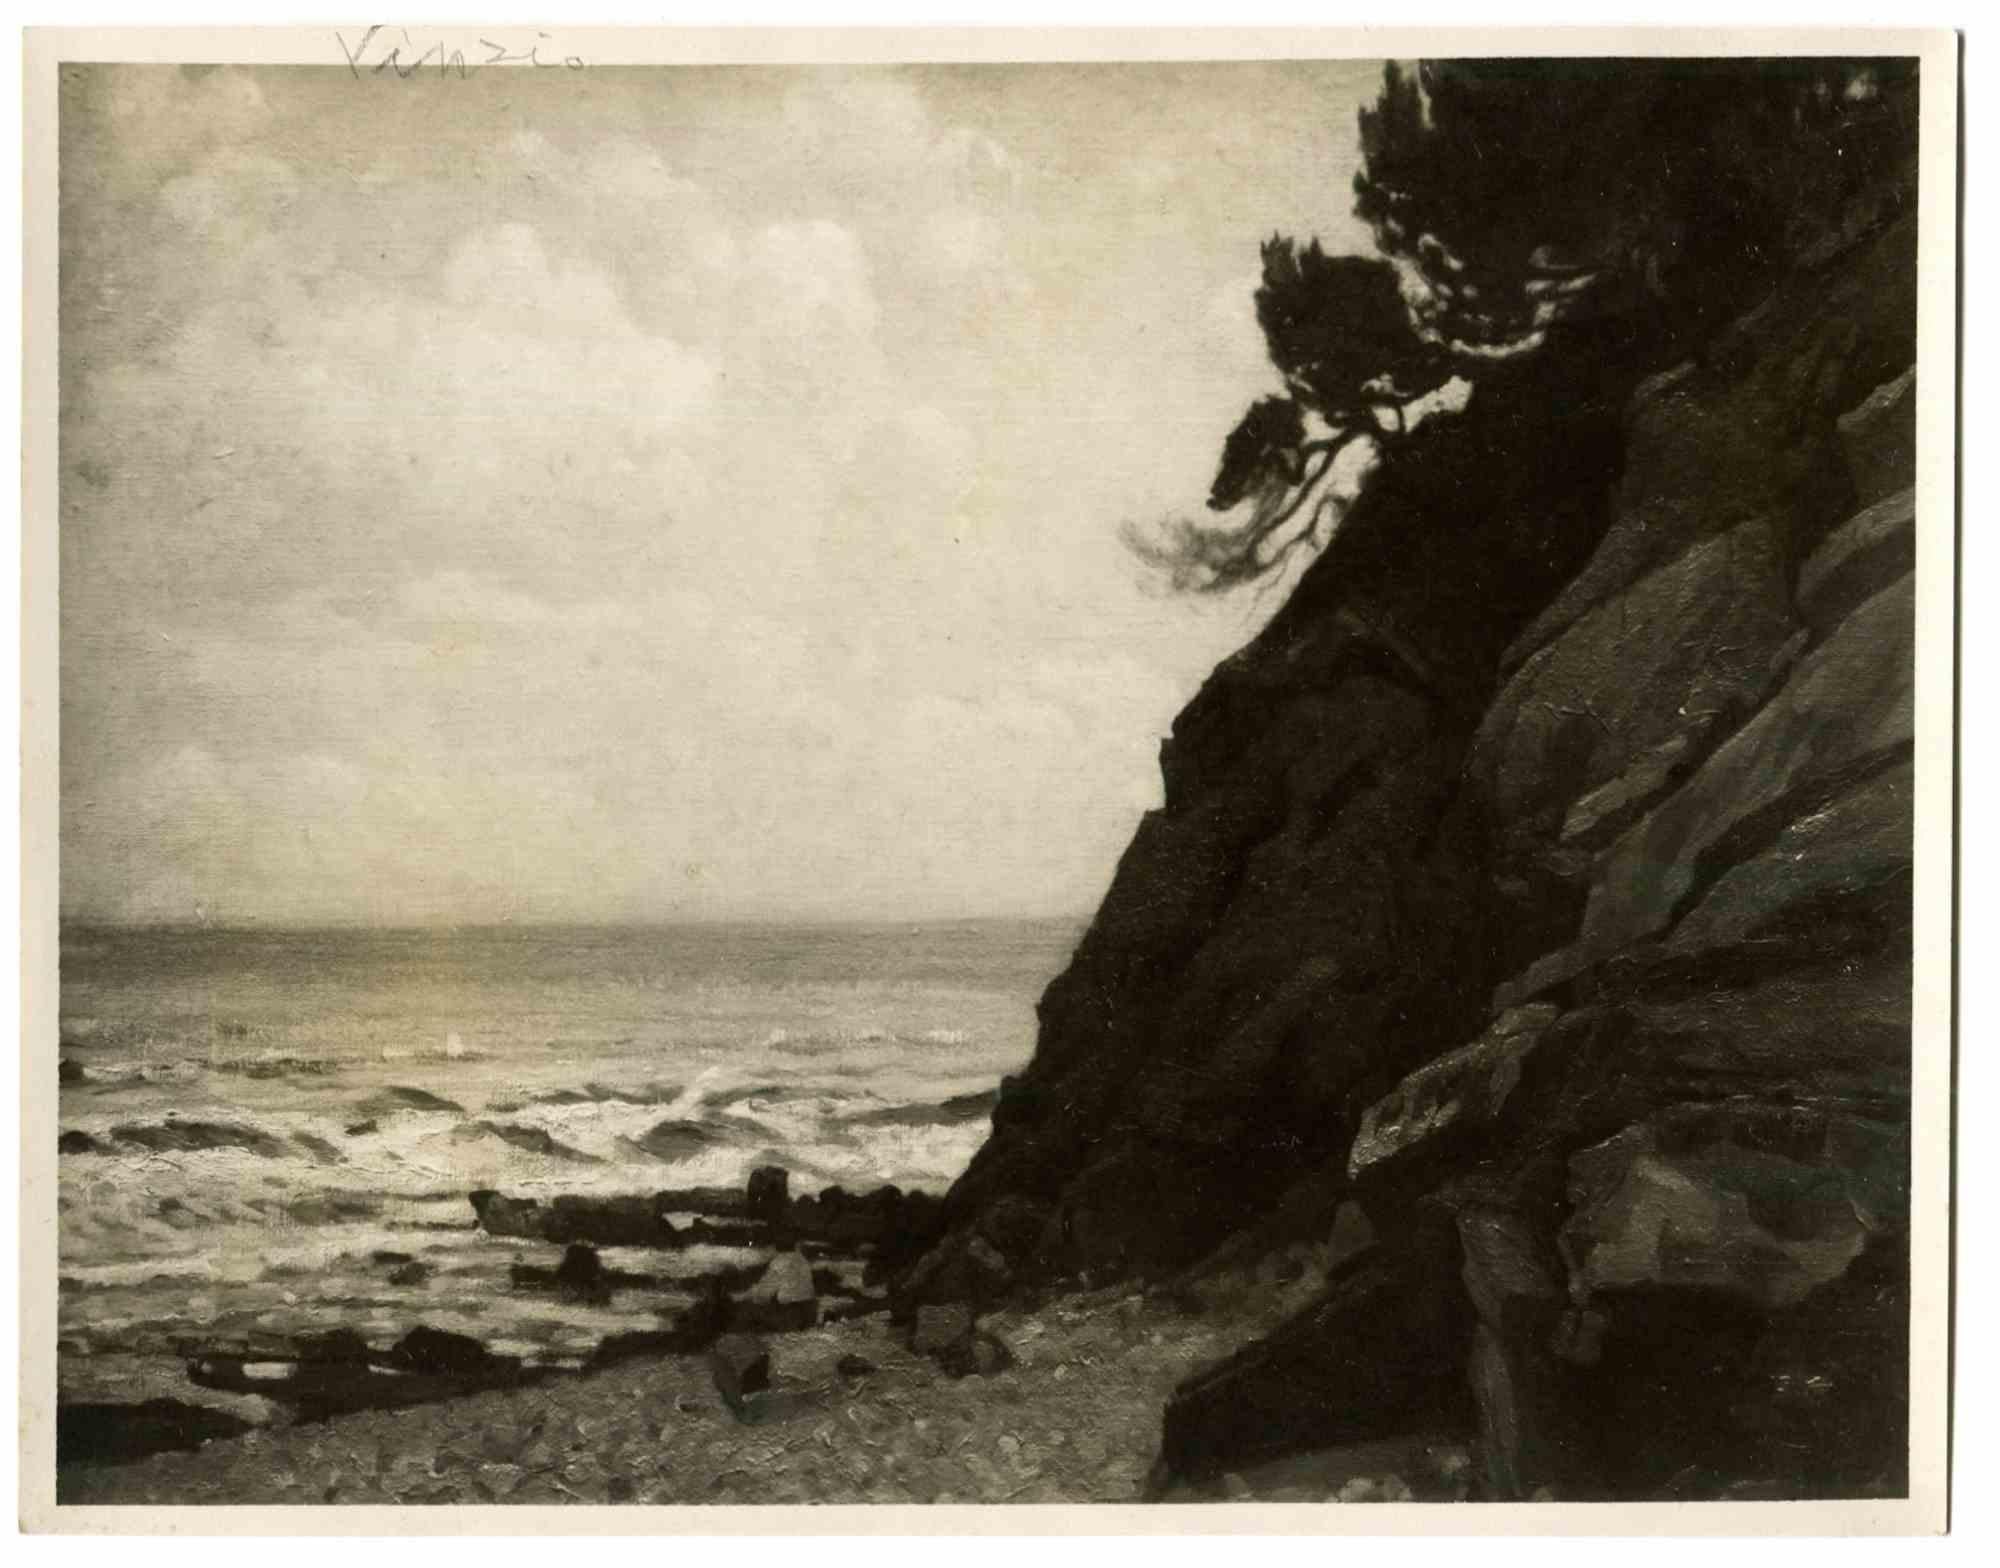 Unknown Black and White Photograph - Landscape (Photo after a Painting) - Early 20th Century